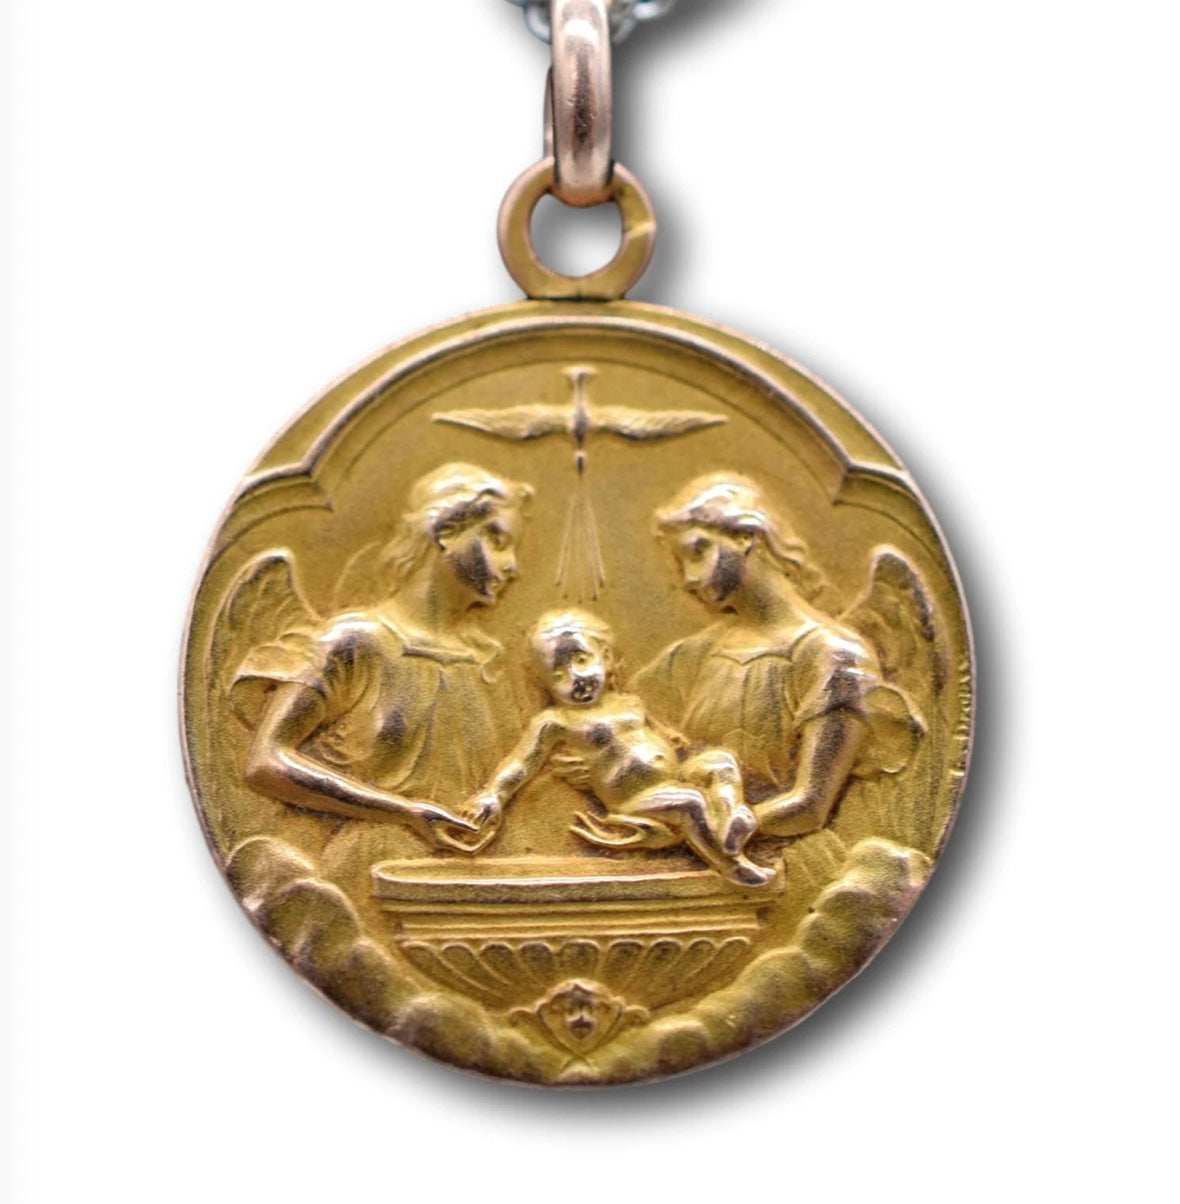 The Engravers of Religious Medals